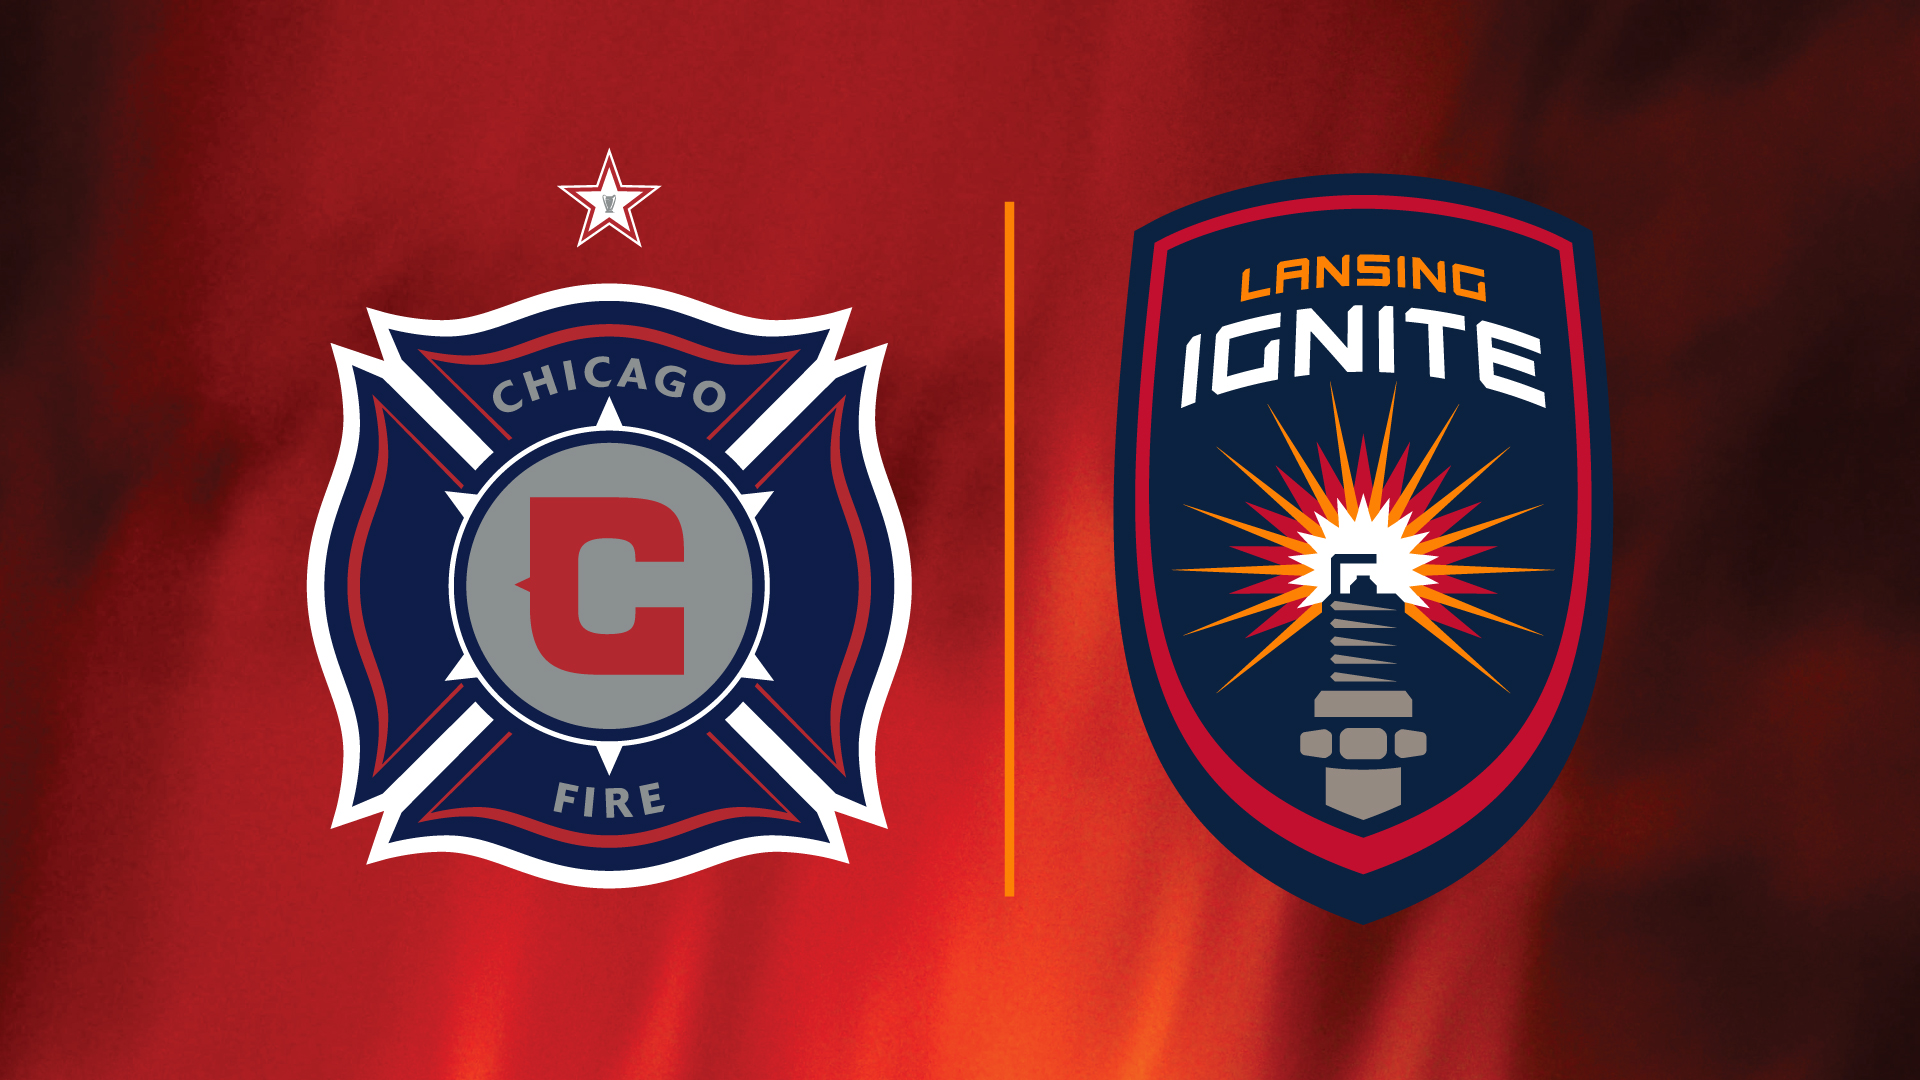 Chicago Fire Soccer Club Lansing Ignite form alliance